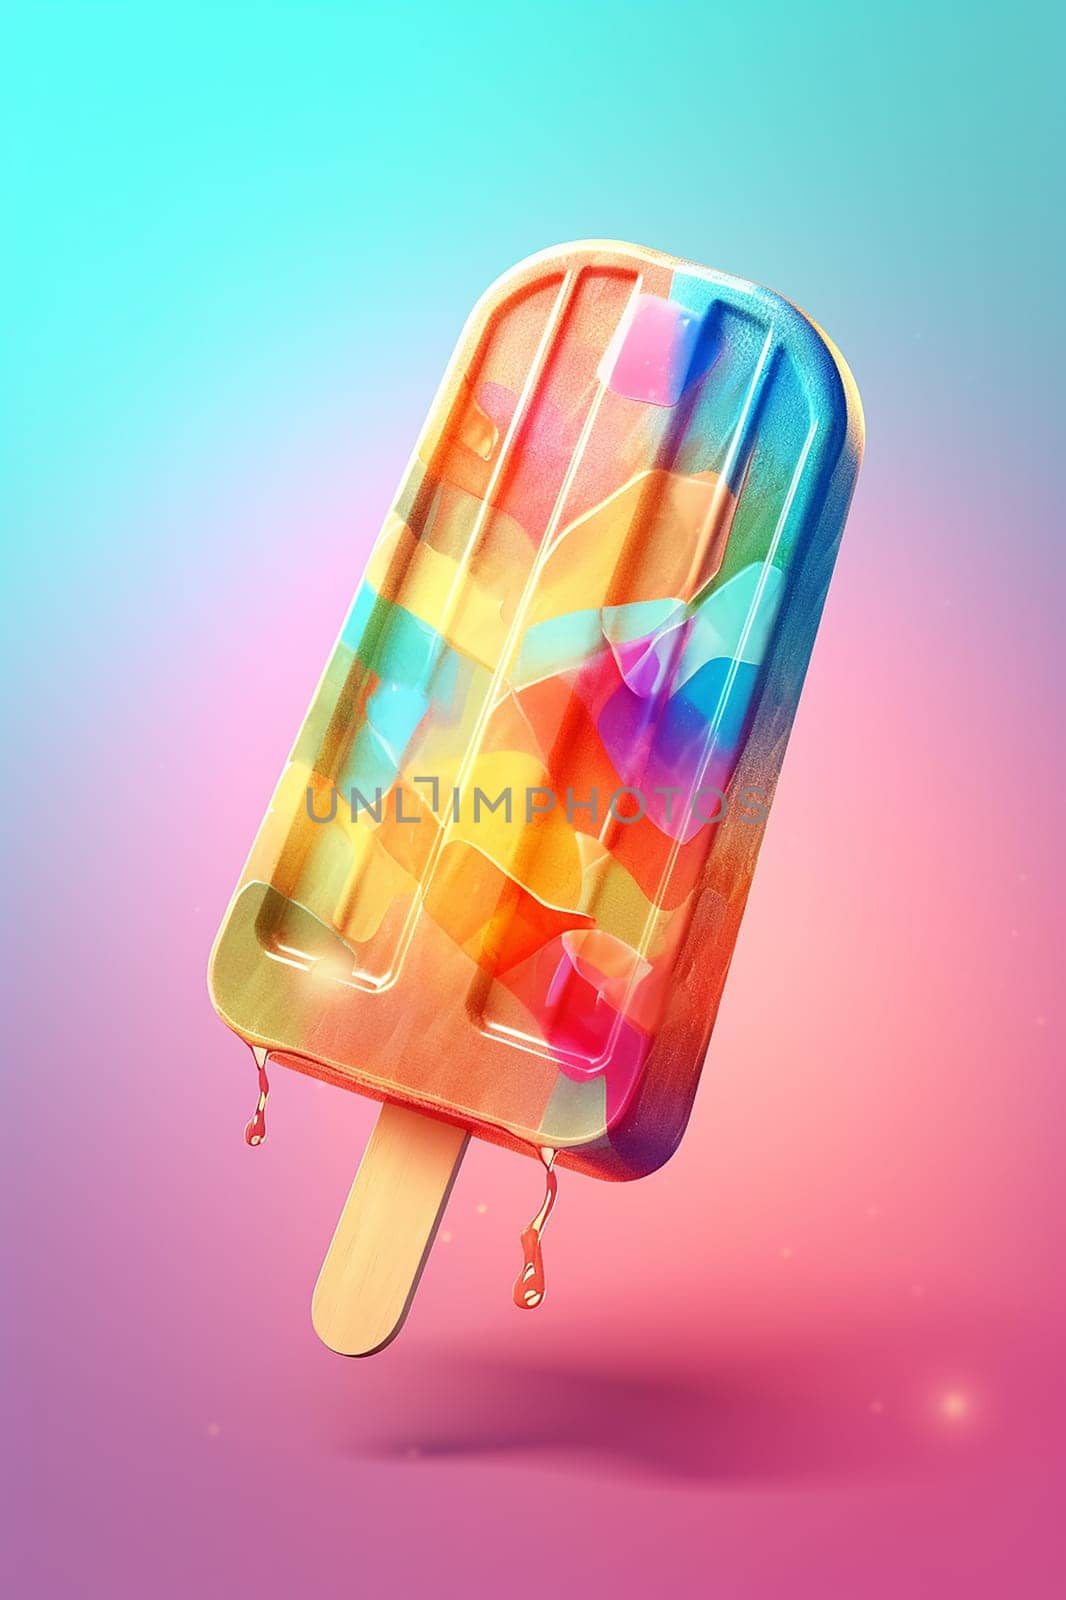 Colorful popsicle melting on a gradient background